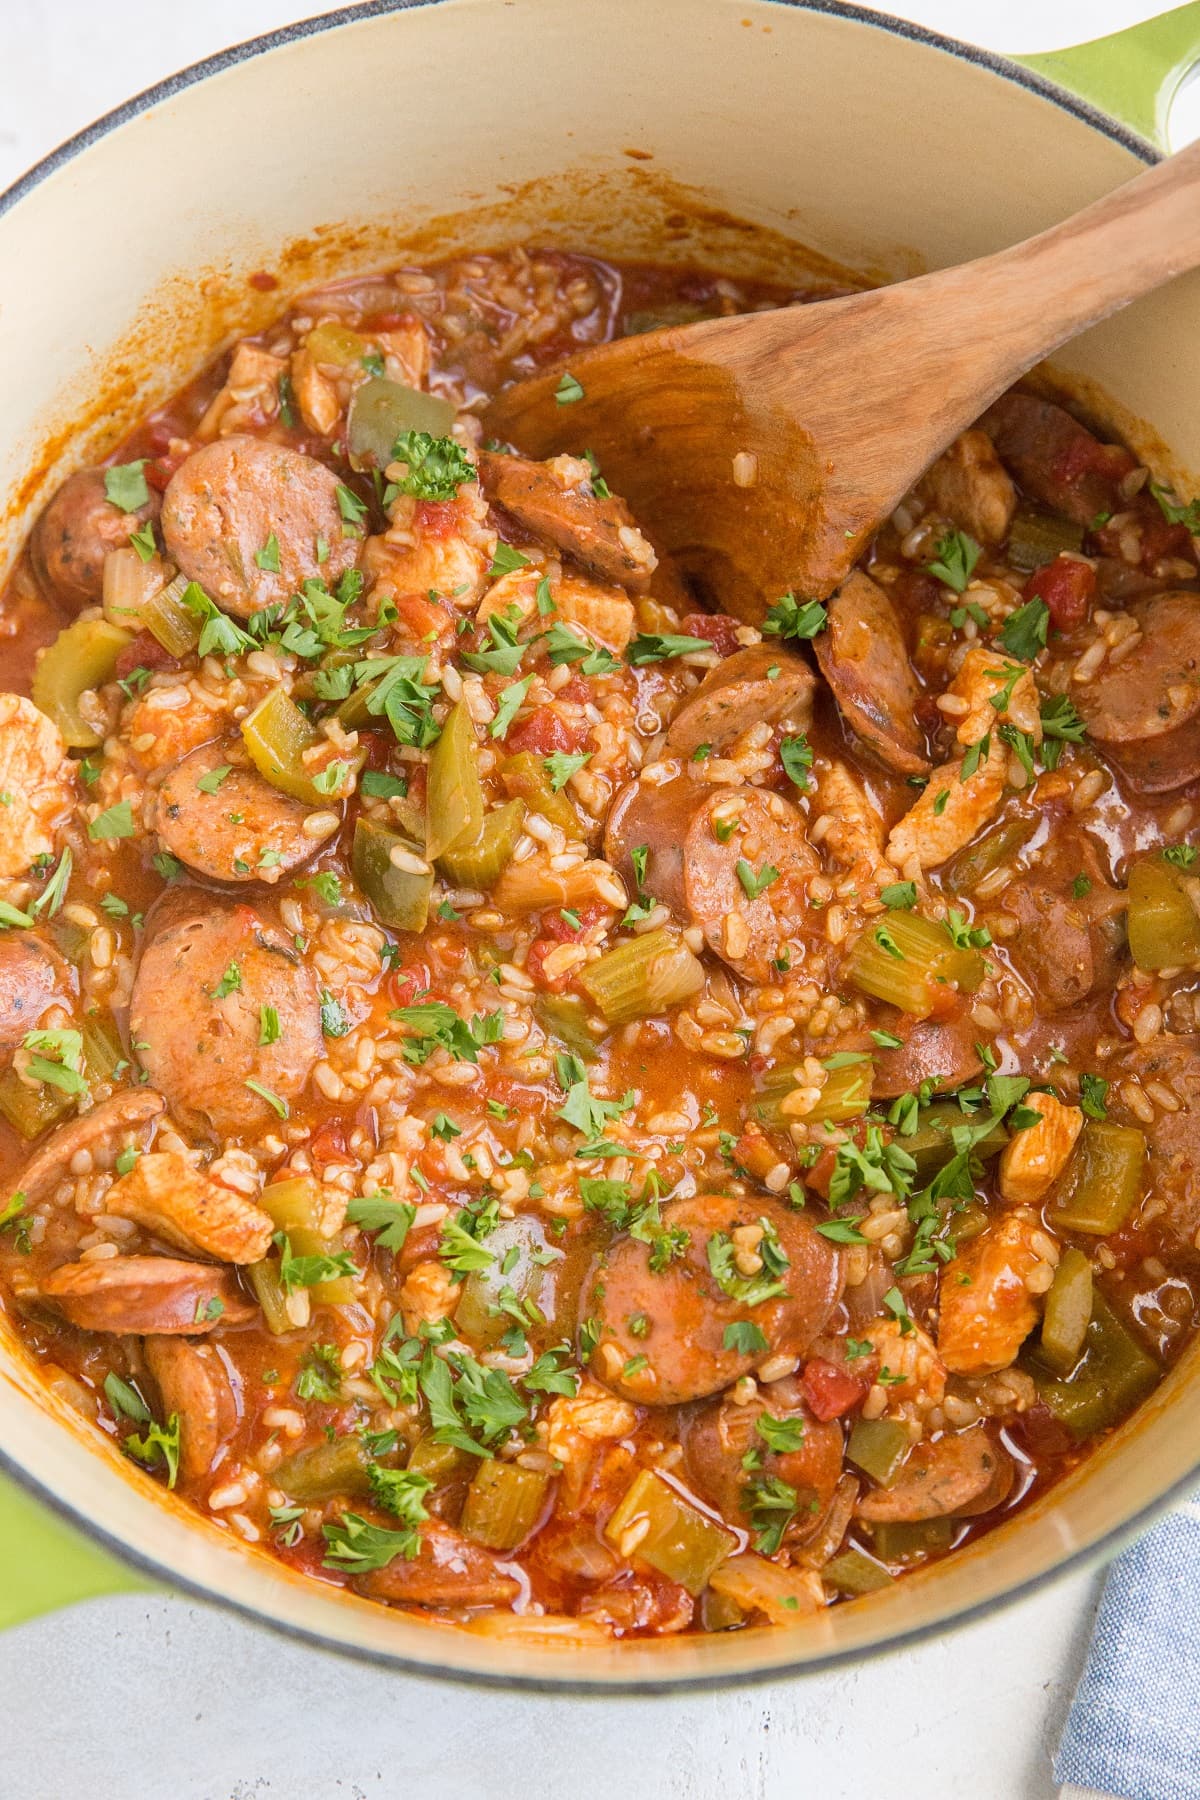 Large green pot of finished Jambalaya with a blue striped napkin to the side